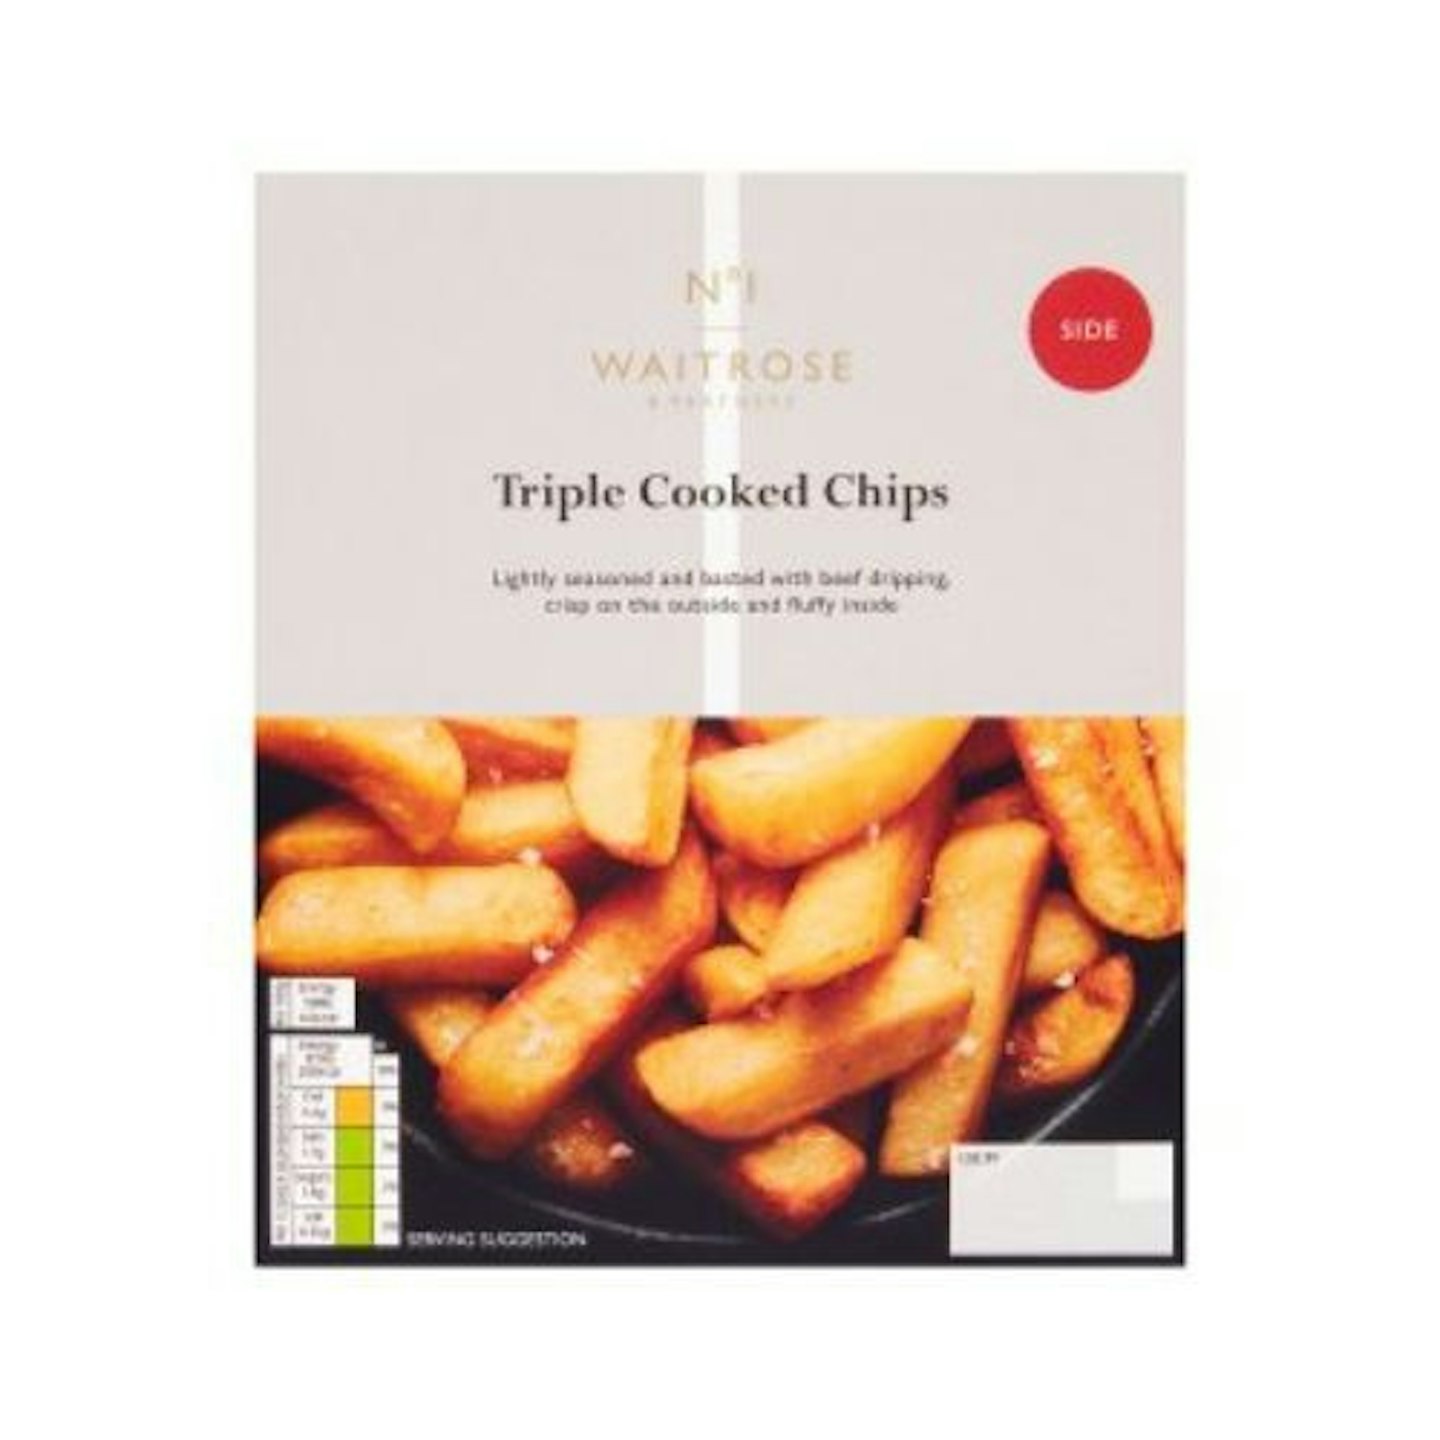 No.1 Triple Cooked Chips